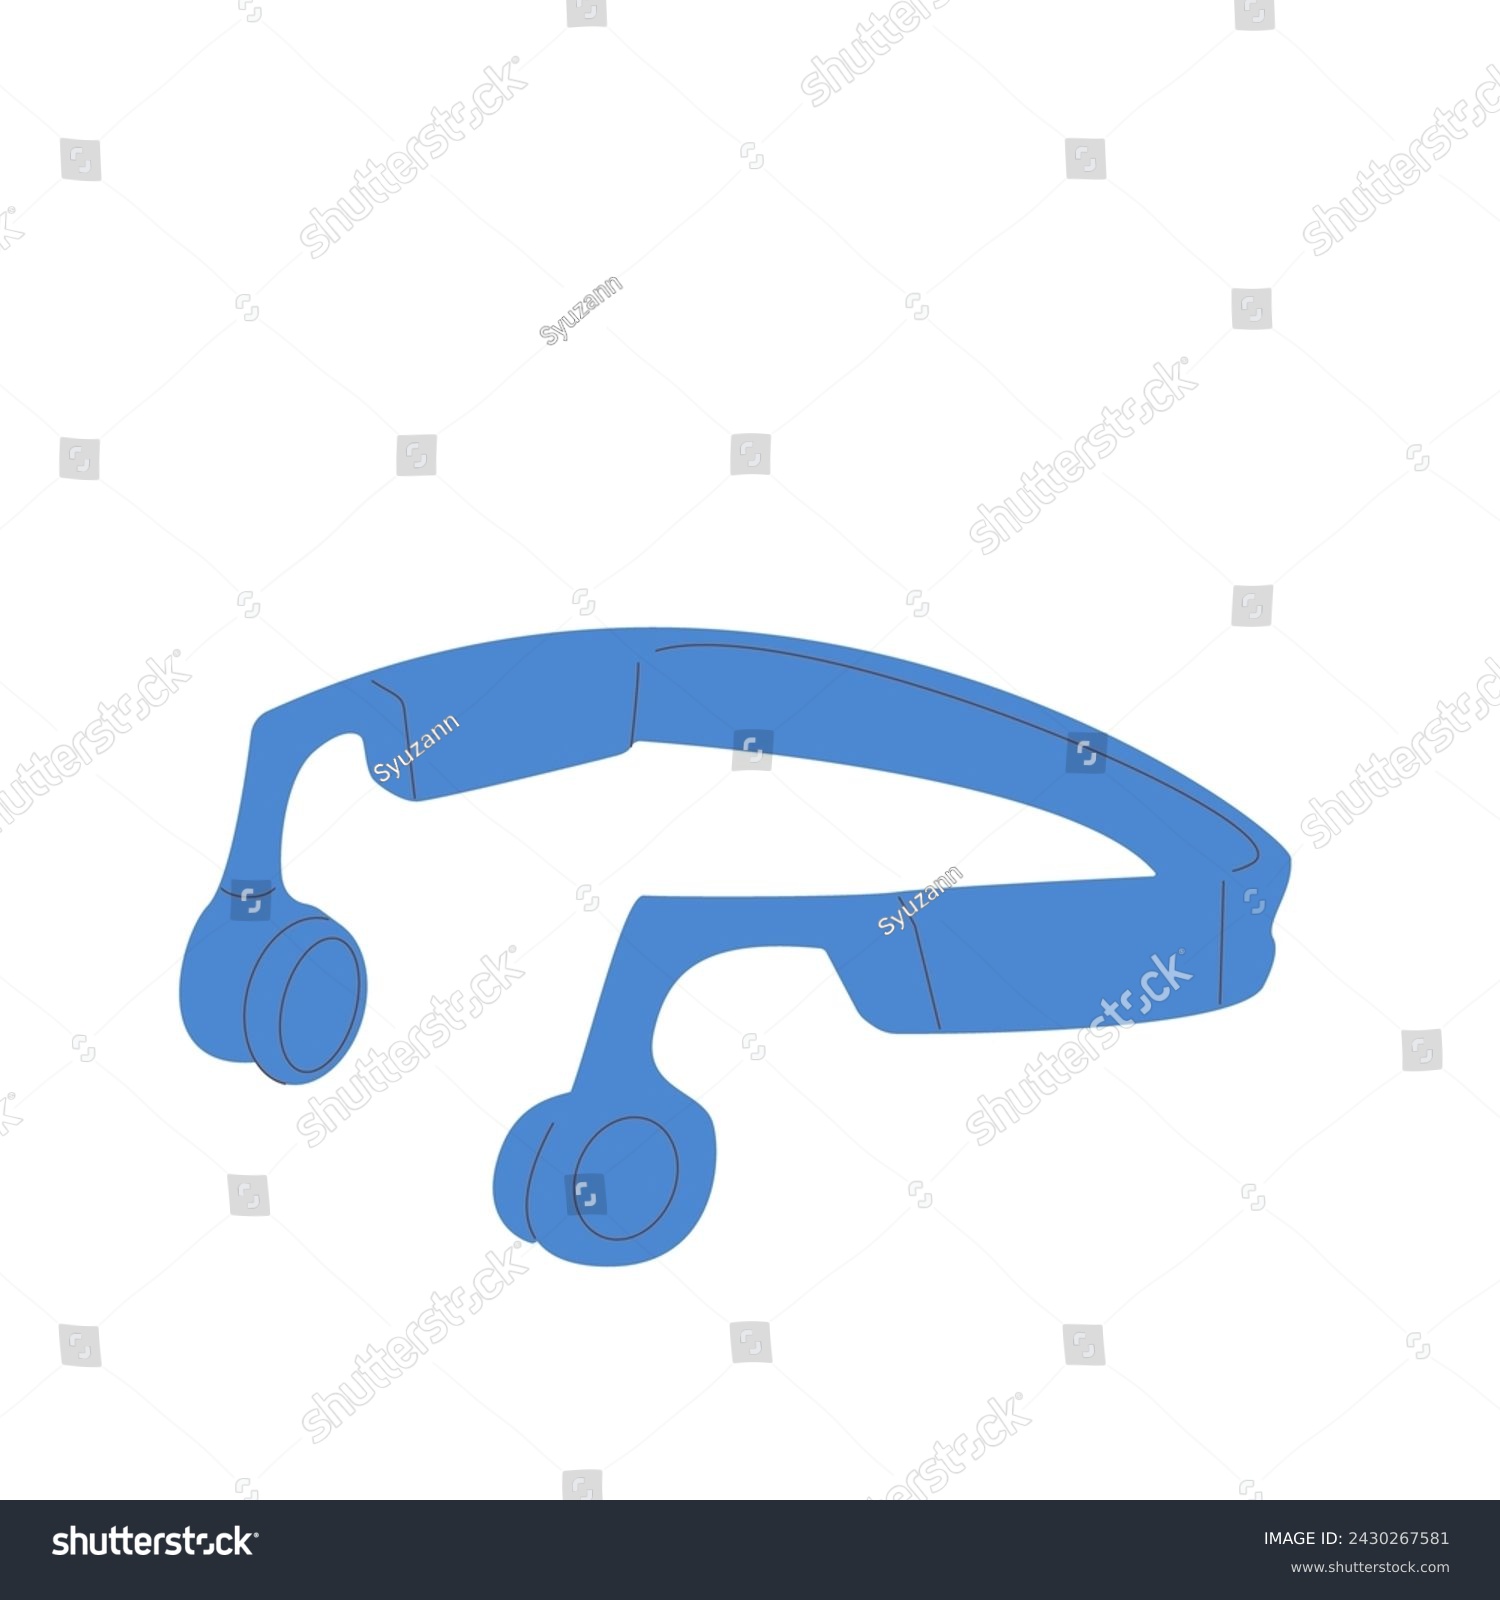 SVG of Bone conduction headphones isolated on white background. Wireless audio equipment for music listening. Sound devices accessory for outdoor activity. Vector flat illustration. svg